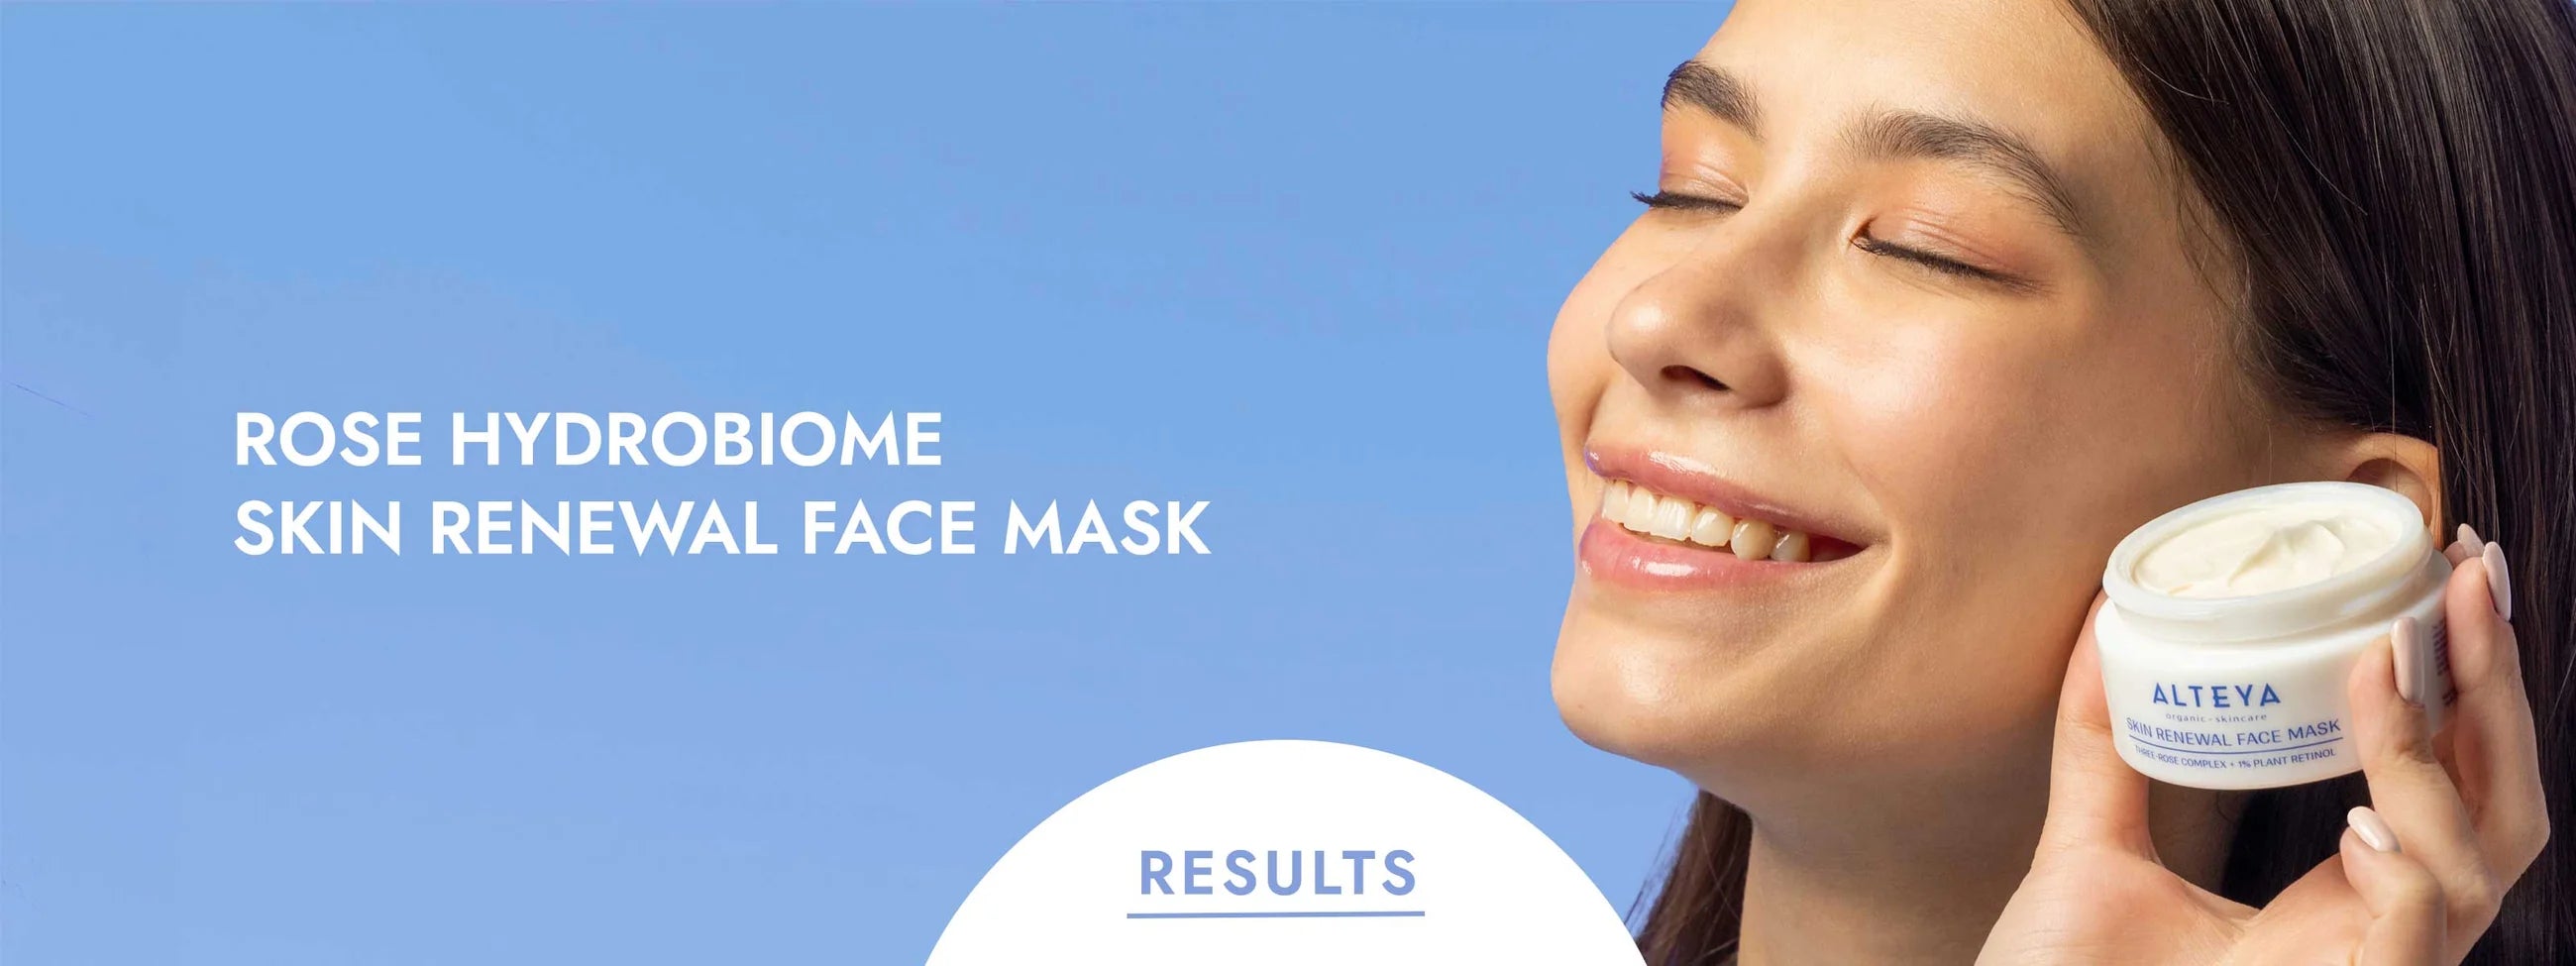 A woman is holding up a face mask with the words rose hydroxone skin renewal face mask.